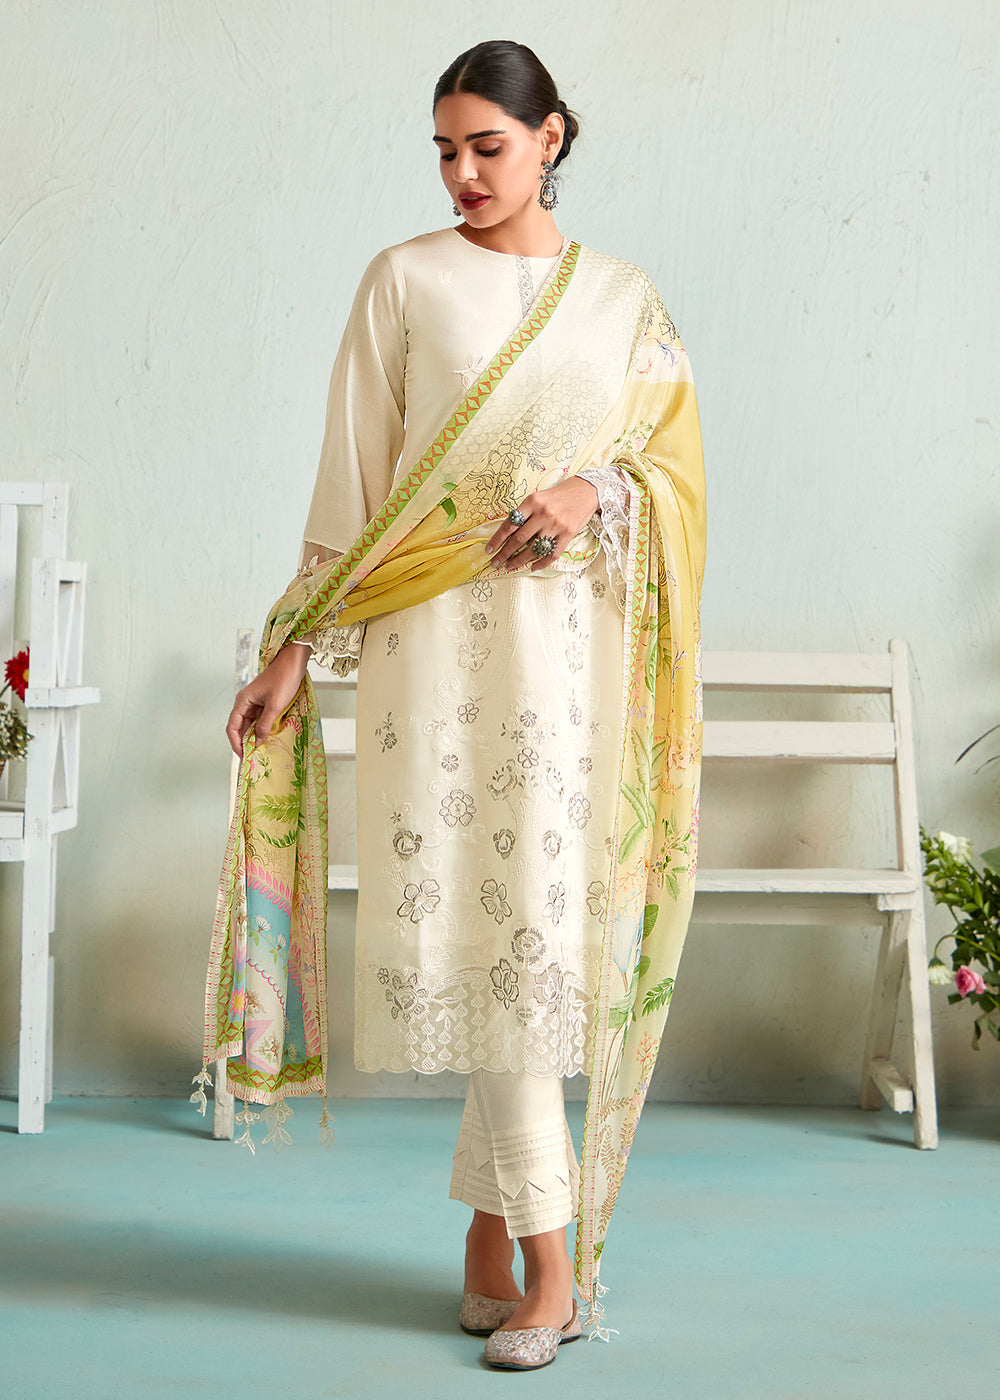 Buy Now Off White Pure Muslin Resham Embroidered Salwar Suit Online in USA, UK, Canada, Germany, Australia & Worldwide at Empress Clothing.